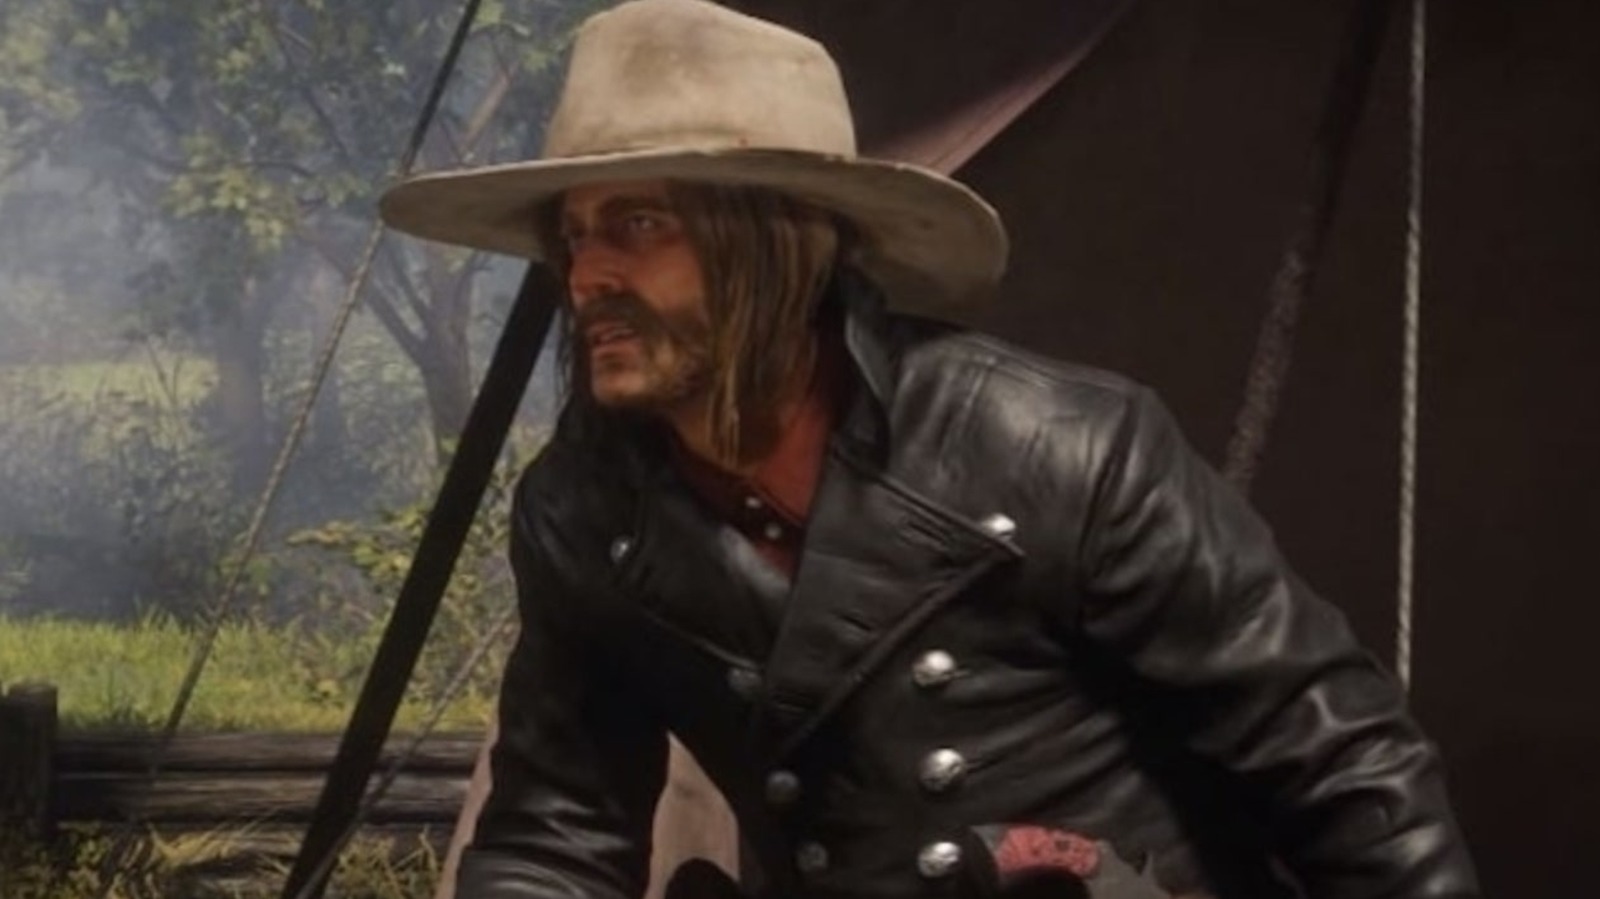 The Micah Fan Theory That Has Red Dead Redemption 2 Fans Talking